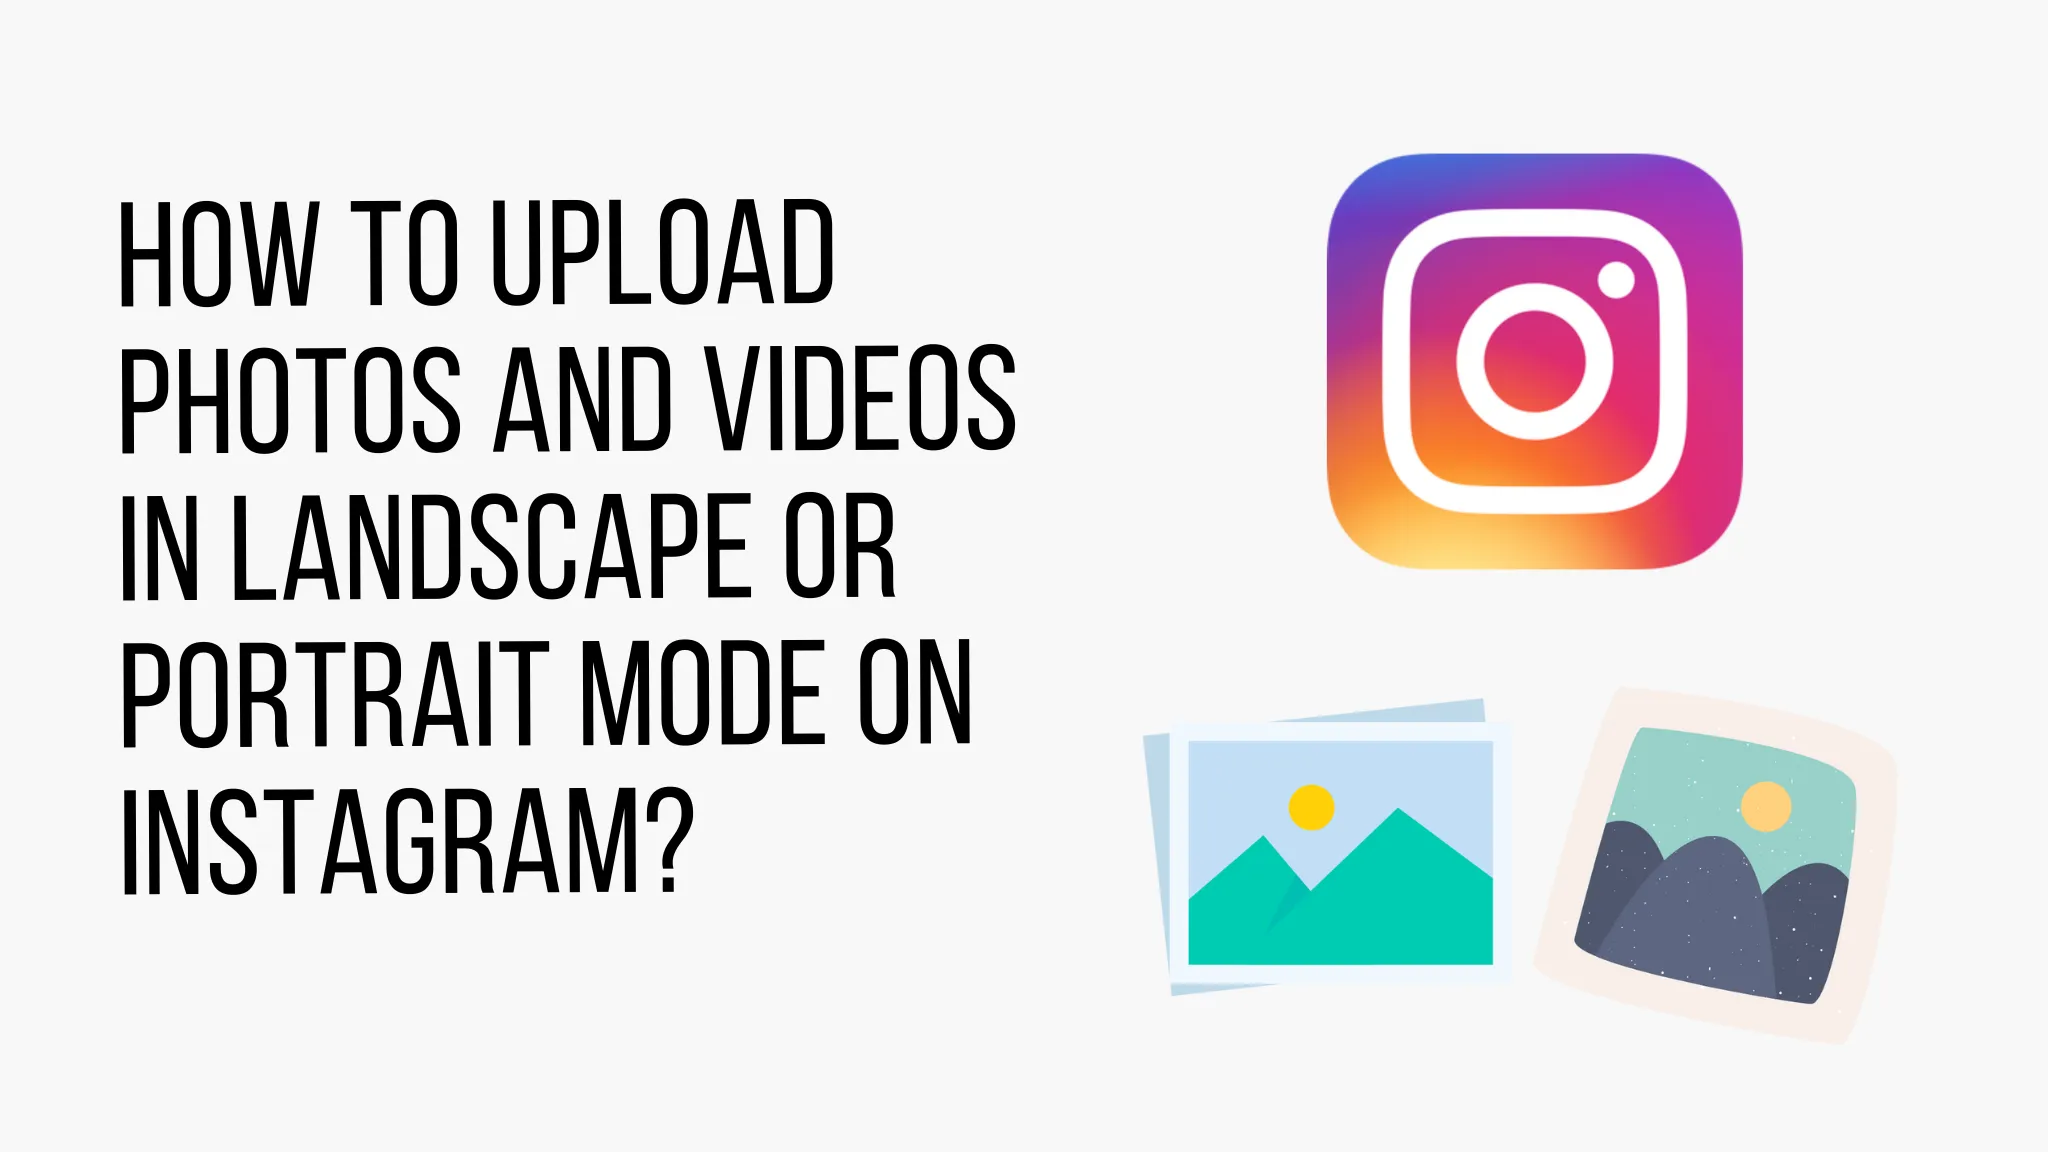 How to Upload Photos and Videos in Landscape or Portrait Mode on Instagram